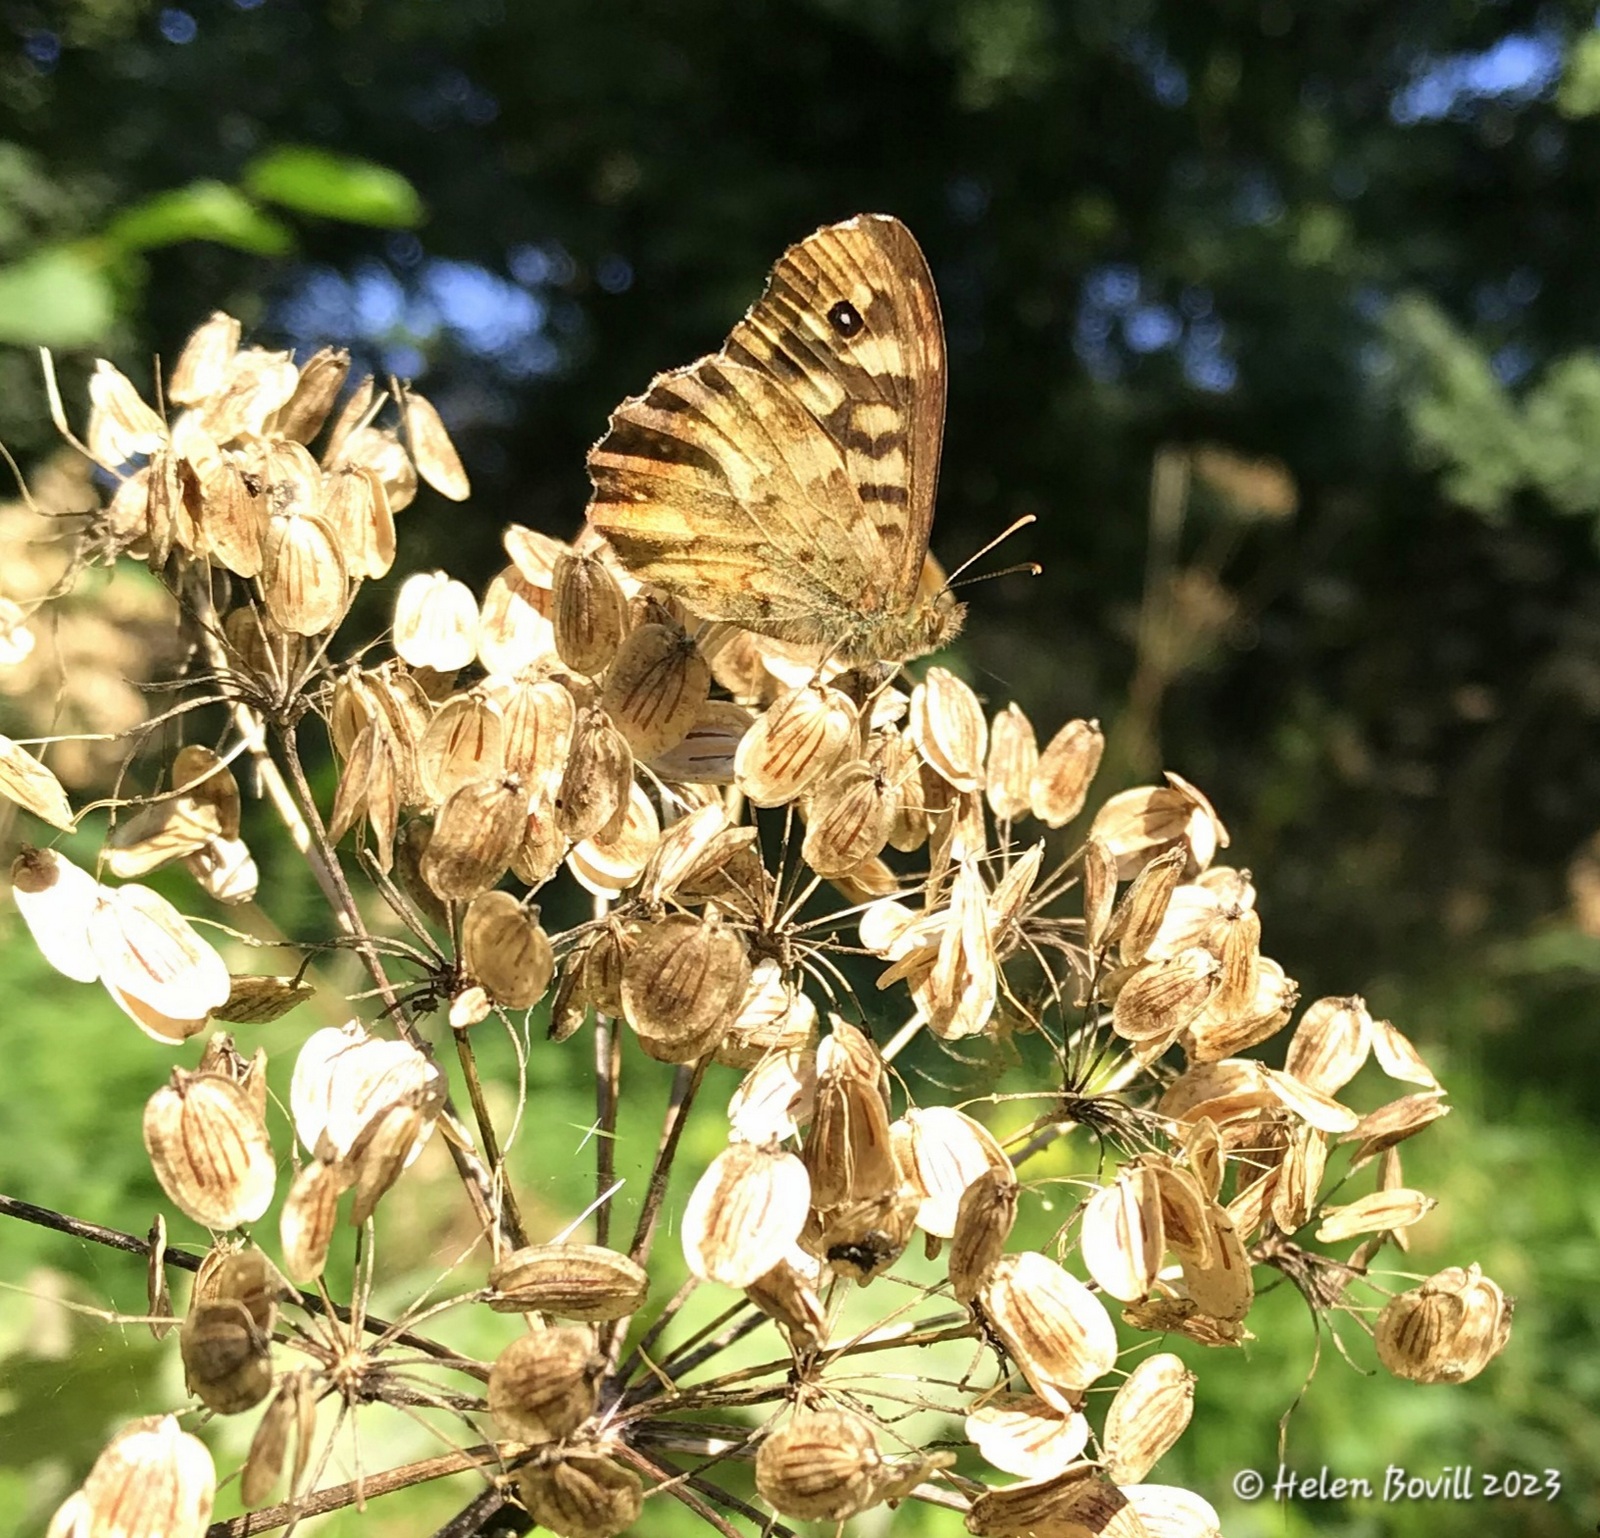 A Speckled Wood butterfly on a Hogweed seed head